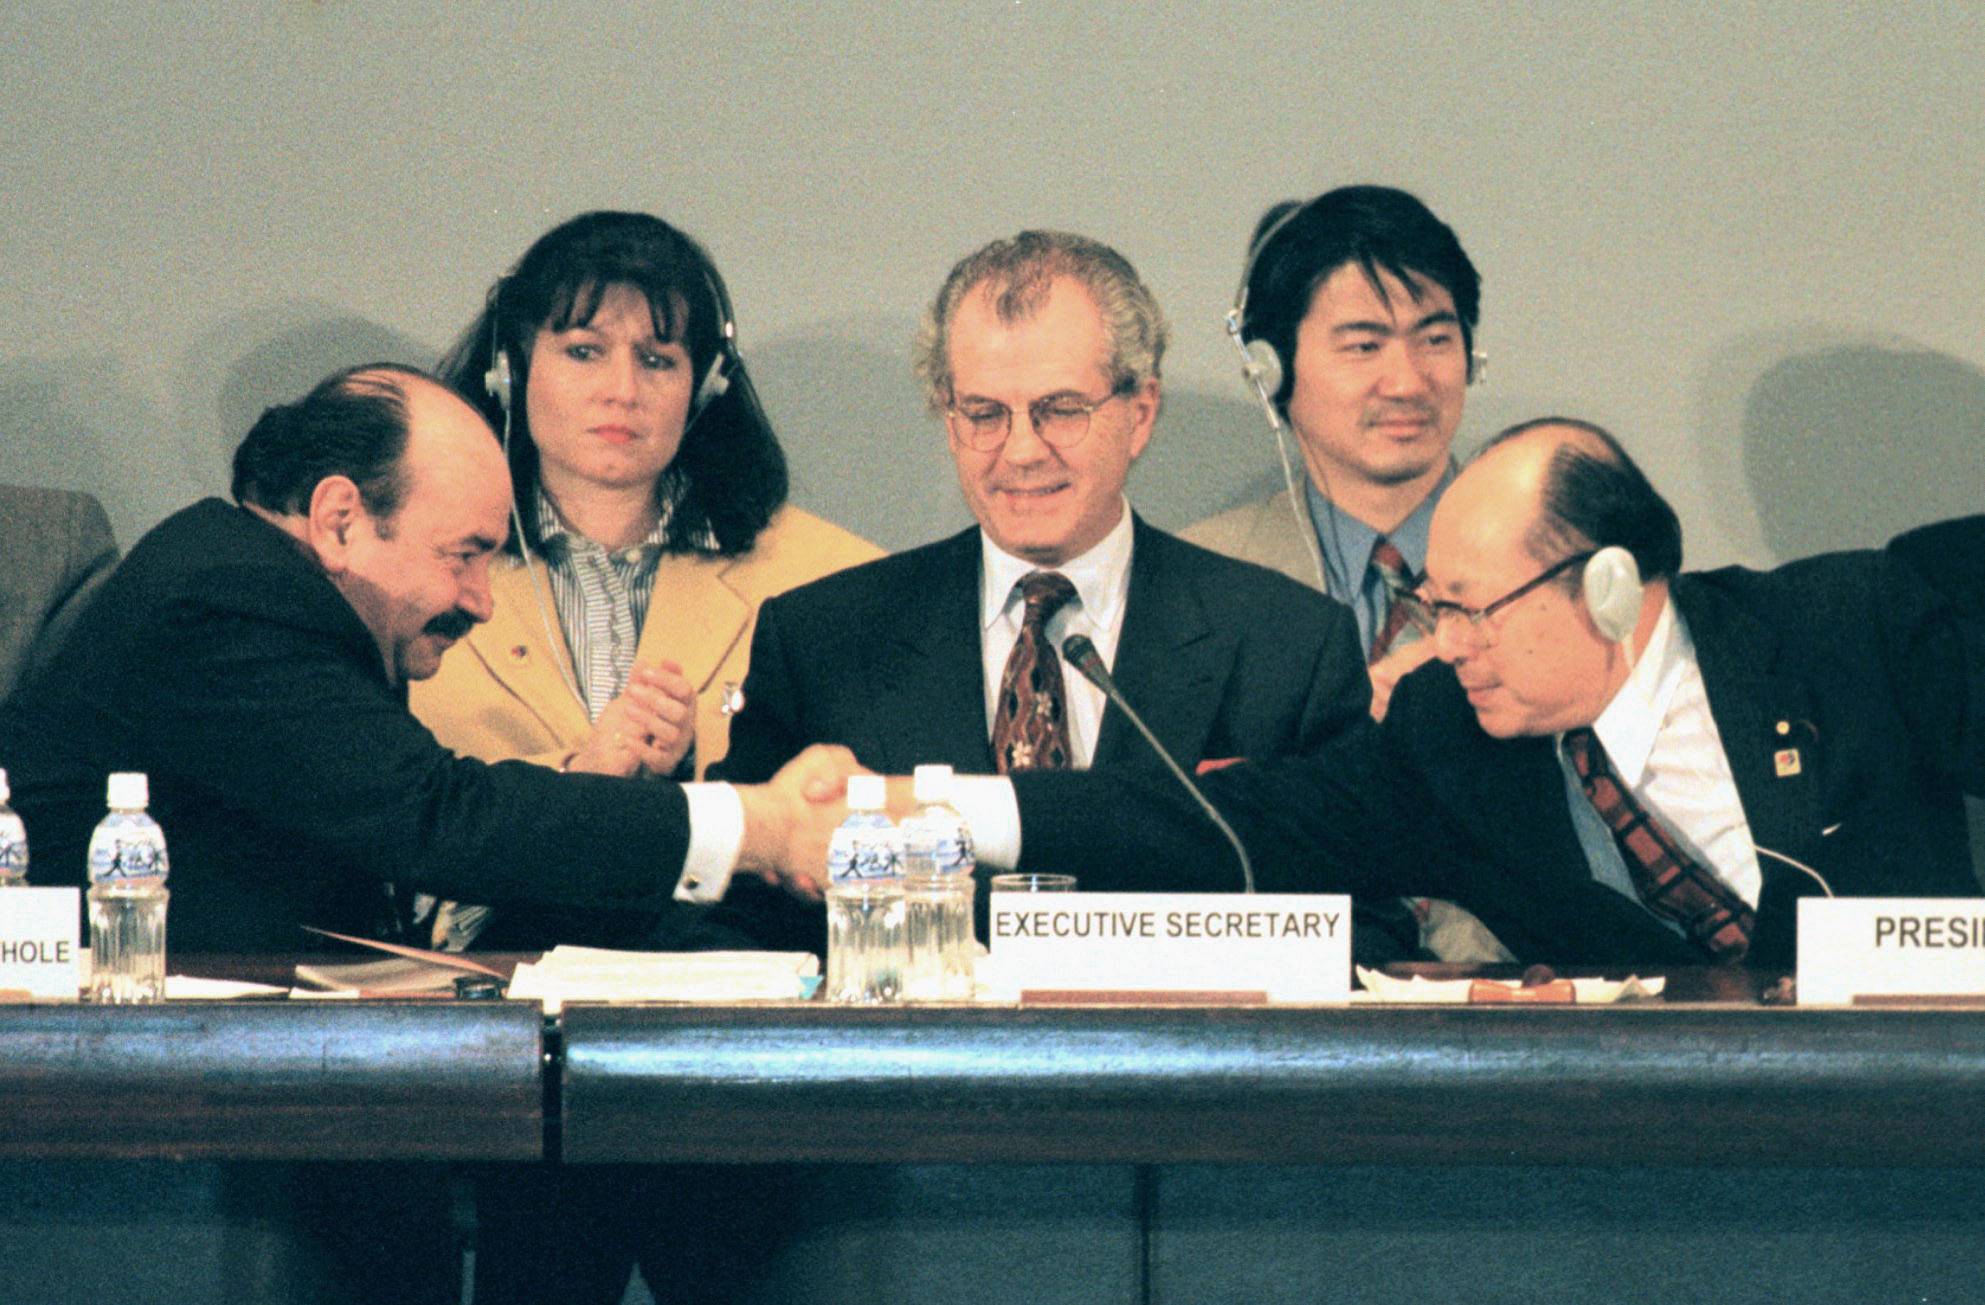 COP3 President Hiroshi Ohki shakes hands with Argentinian Ambassador Raul Estrada-Oyuela as Michael Zammit Cutajar, executive secretary of the U.N. climate process, looks on, after the closure of the meeting approving the Kyoto Protocol at the Kyoto International Conference Hall on Dec. 11, 1997. | KYODO